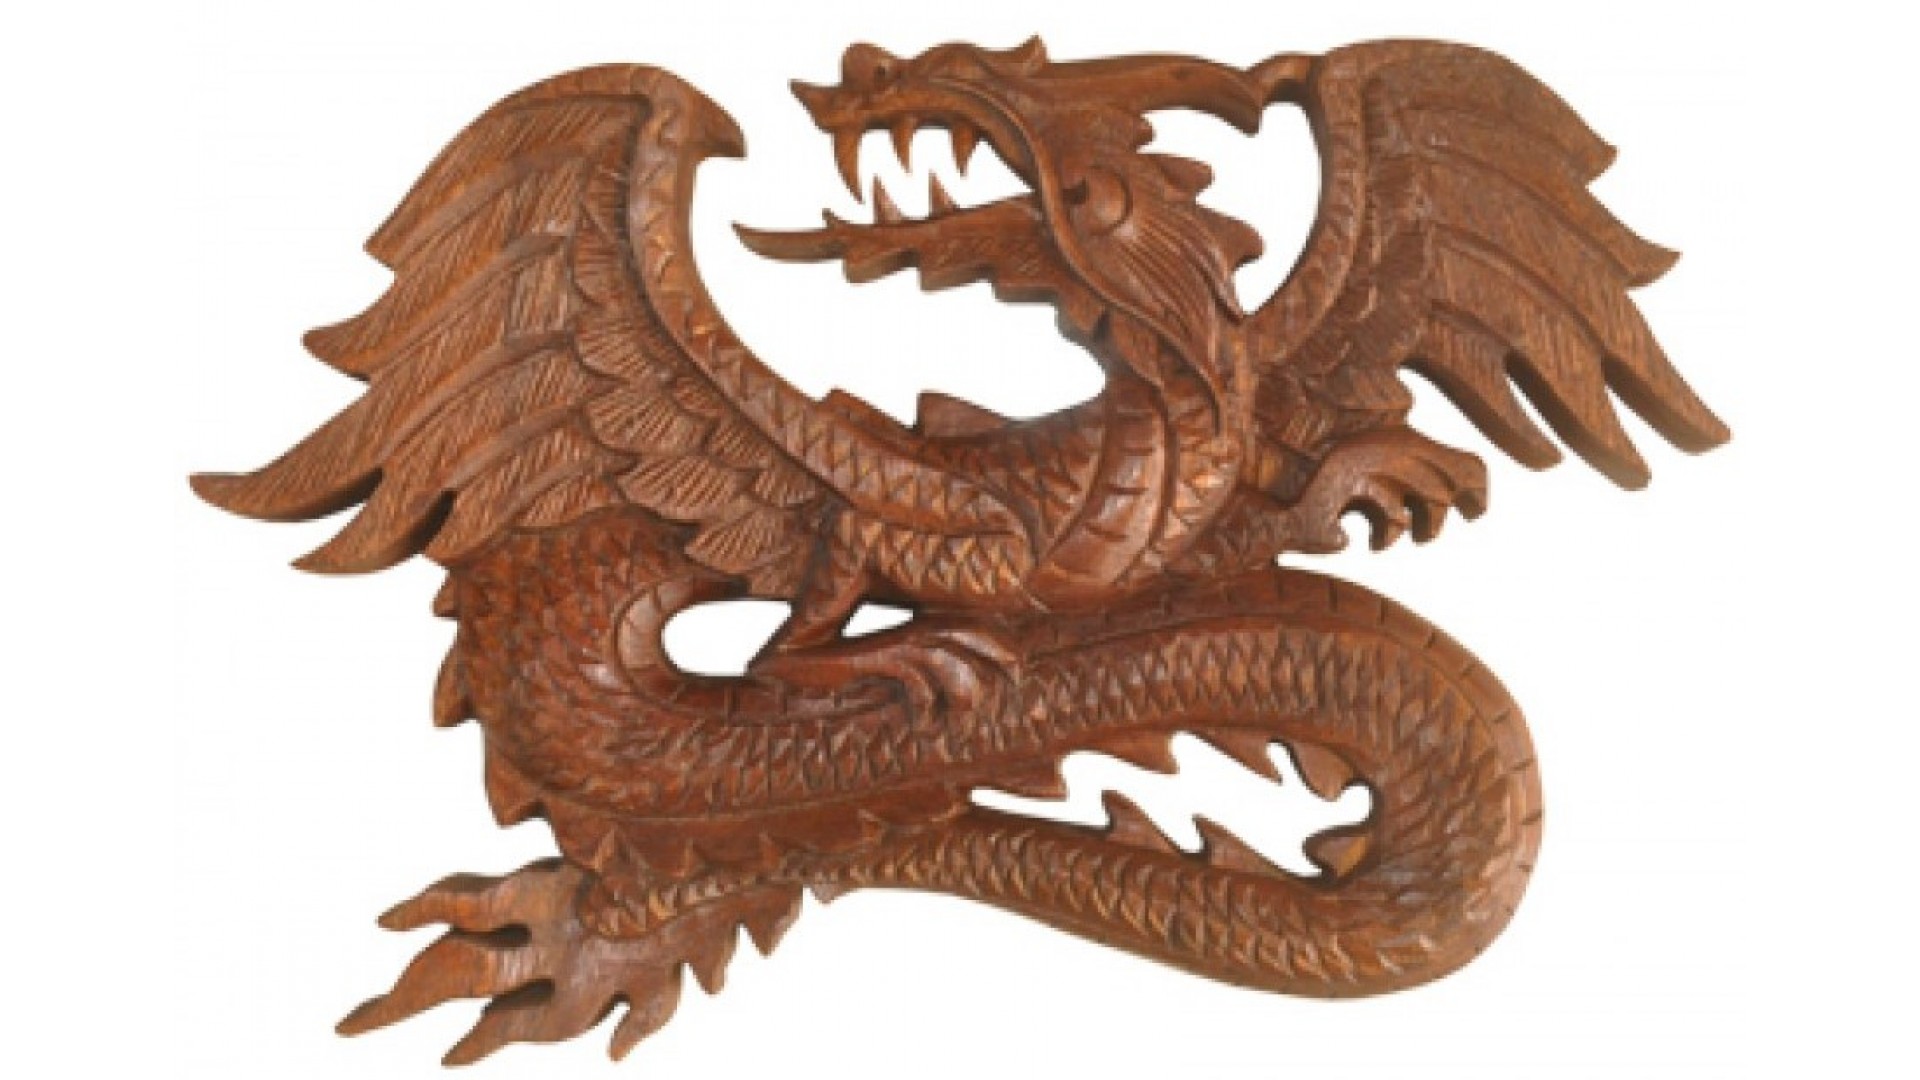 https://www.budivis.com/image/cache/catalog/A%20Blog/A%20blog%20pic/bv4474-relief-dragon-wood-carving-900x900-1920x1080.jpg